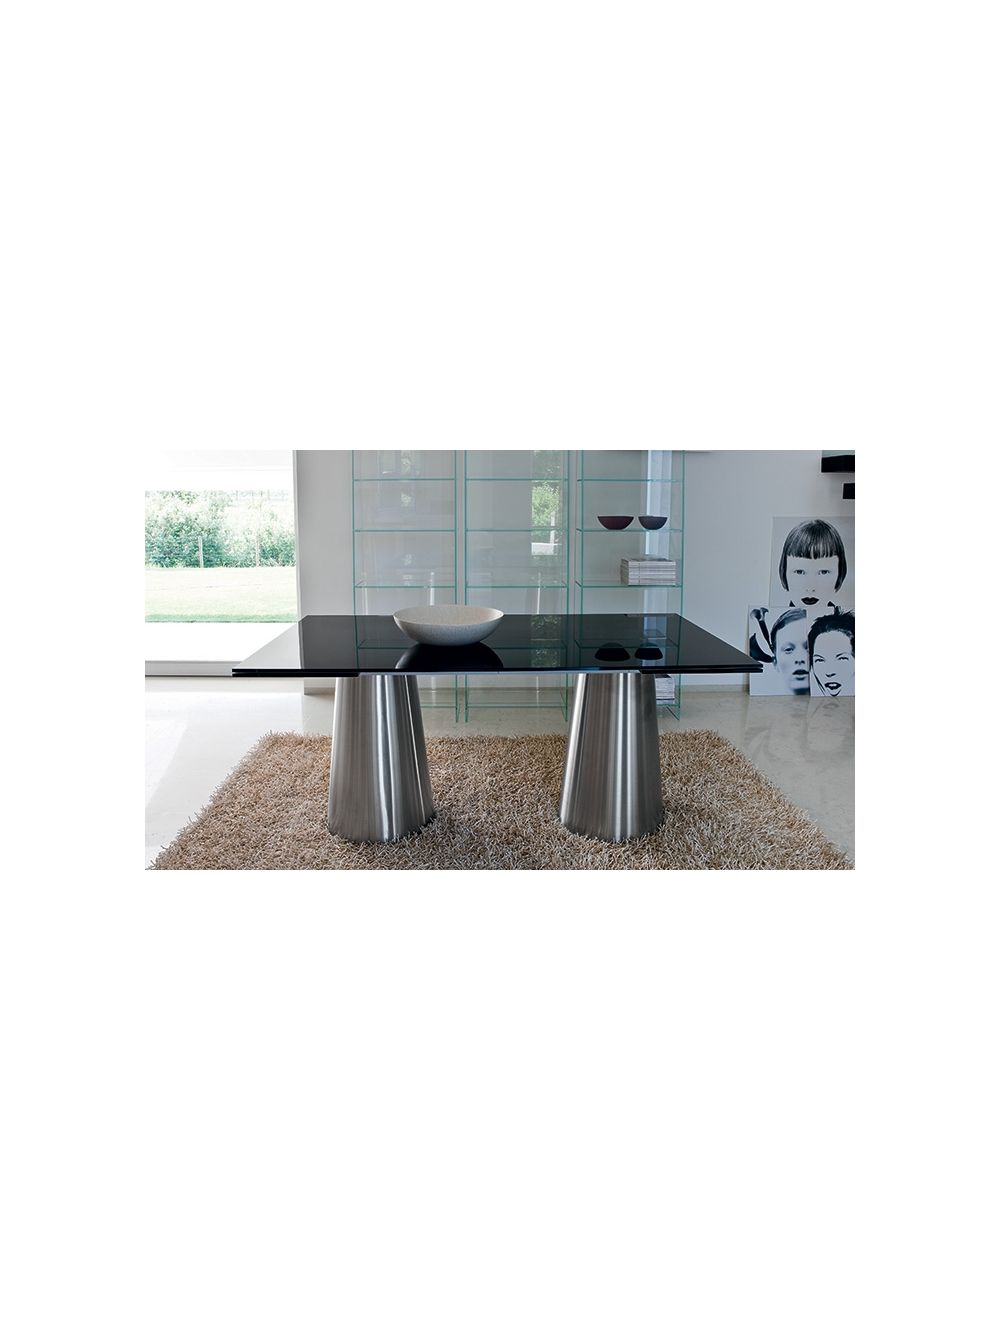 Table Totem Two Bases by Sovet, Vente online